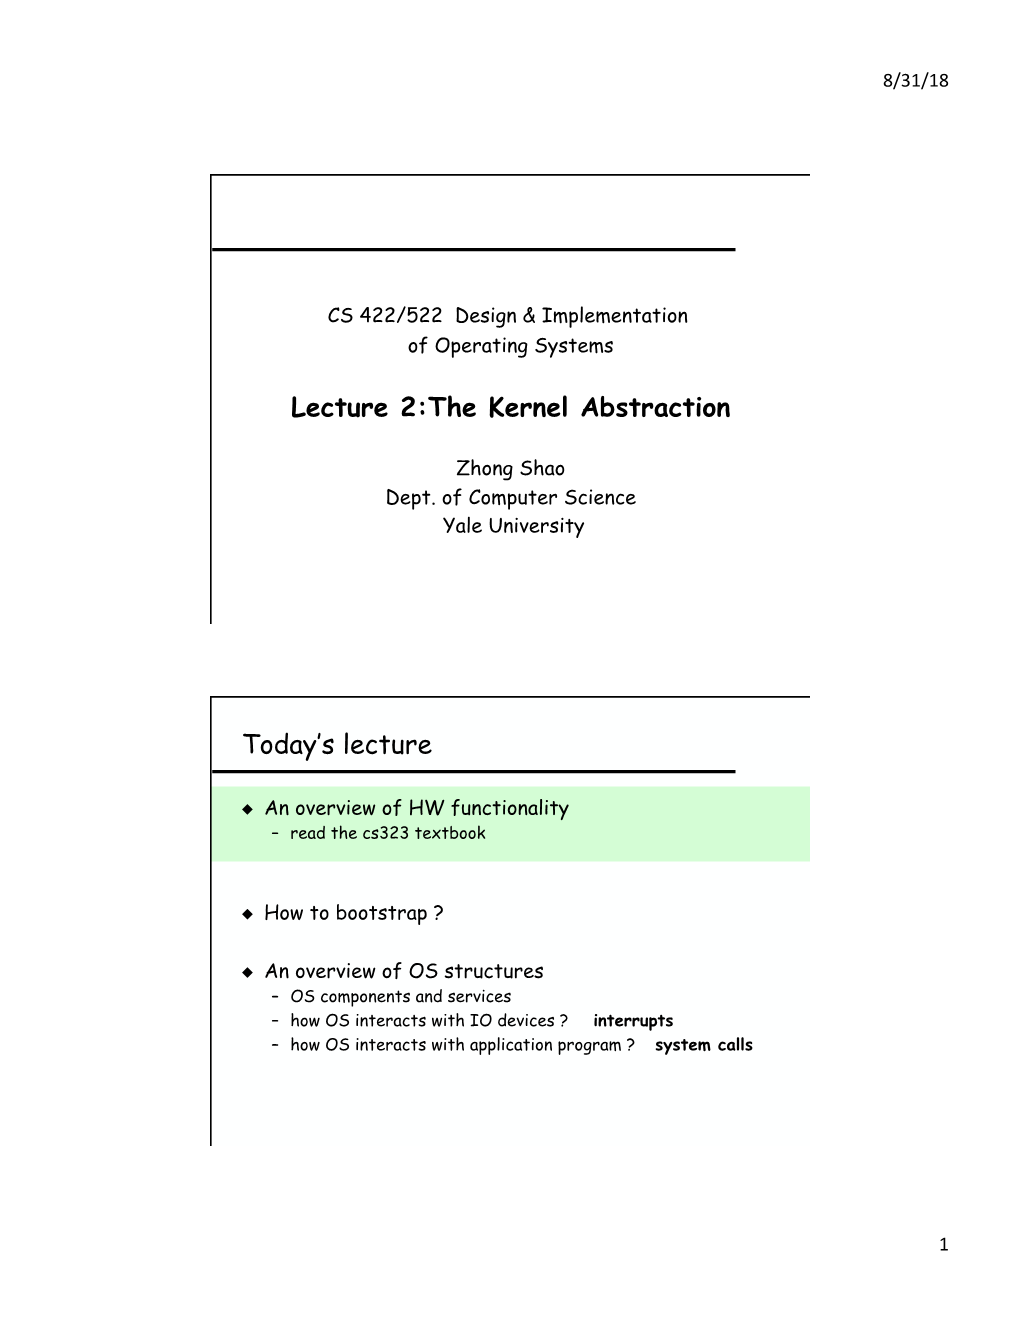 Lecture 2:The Kernel Abstraction Today's Lecture